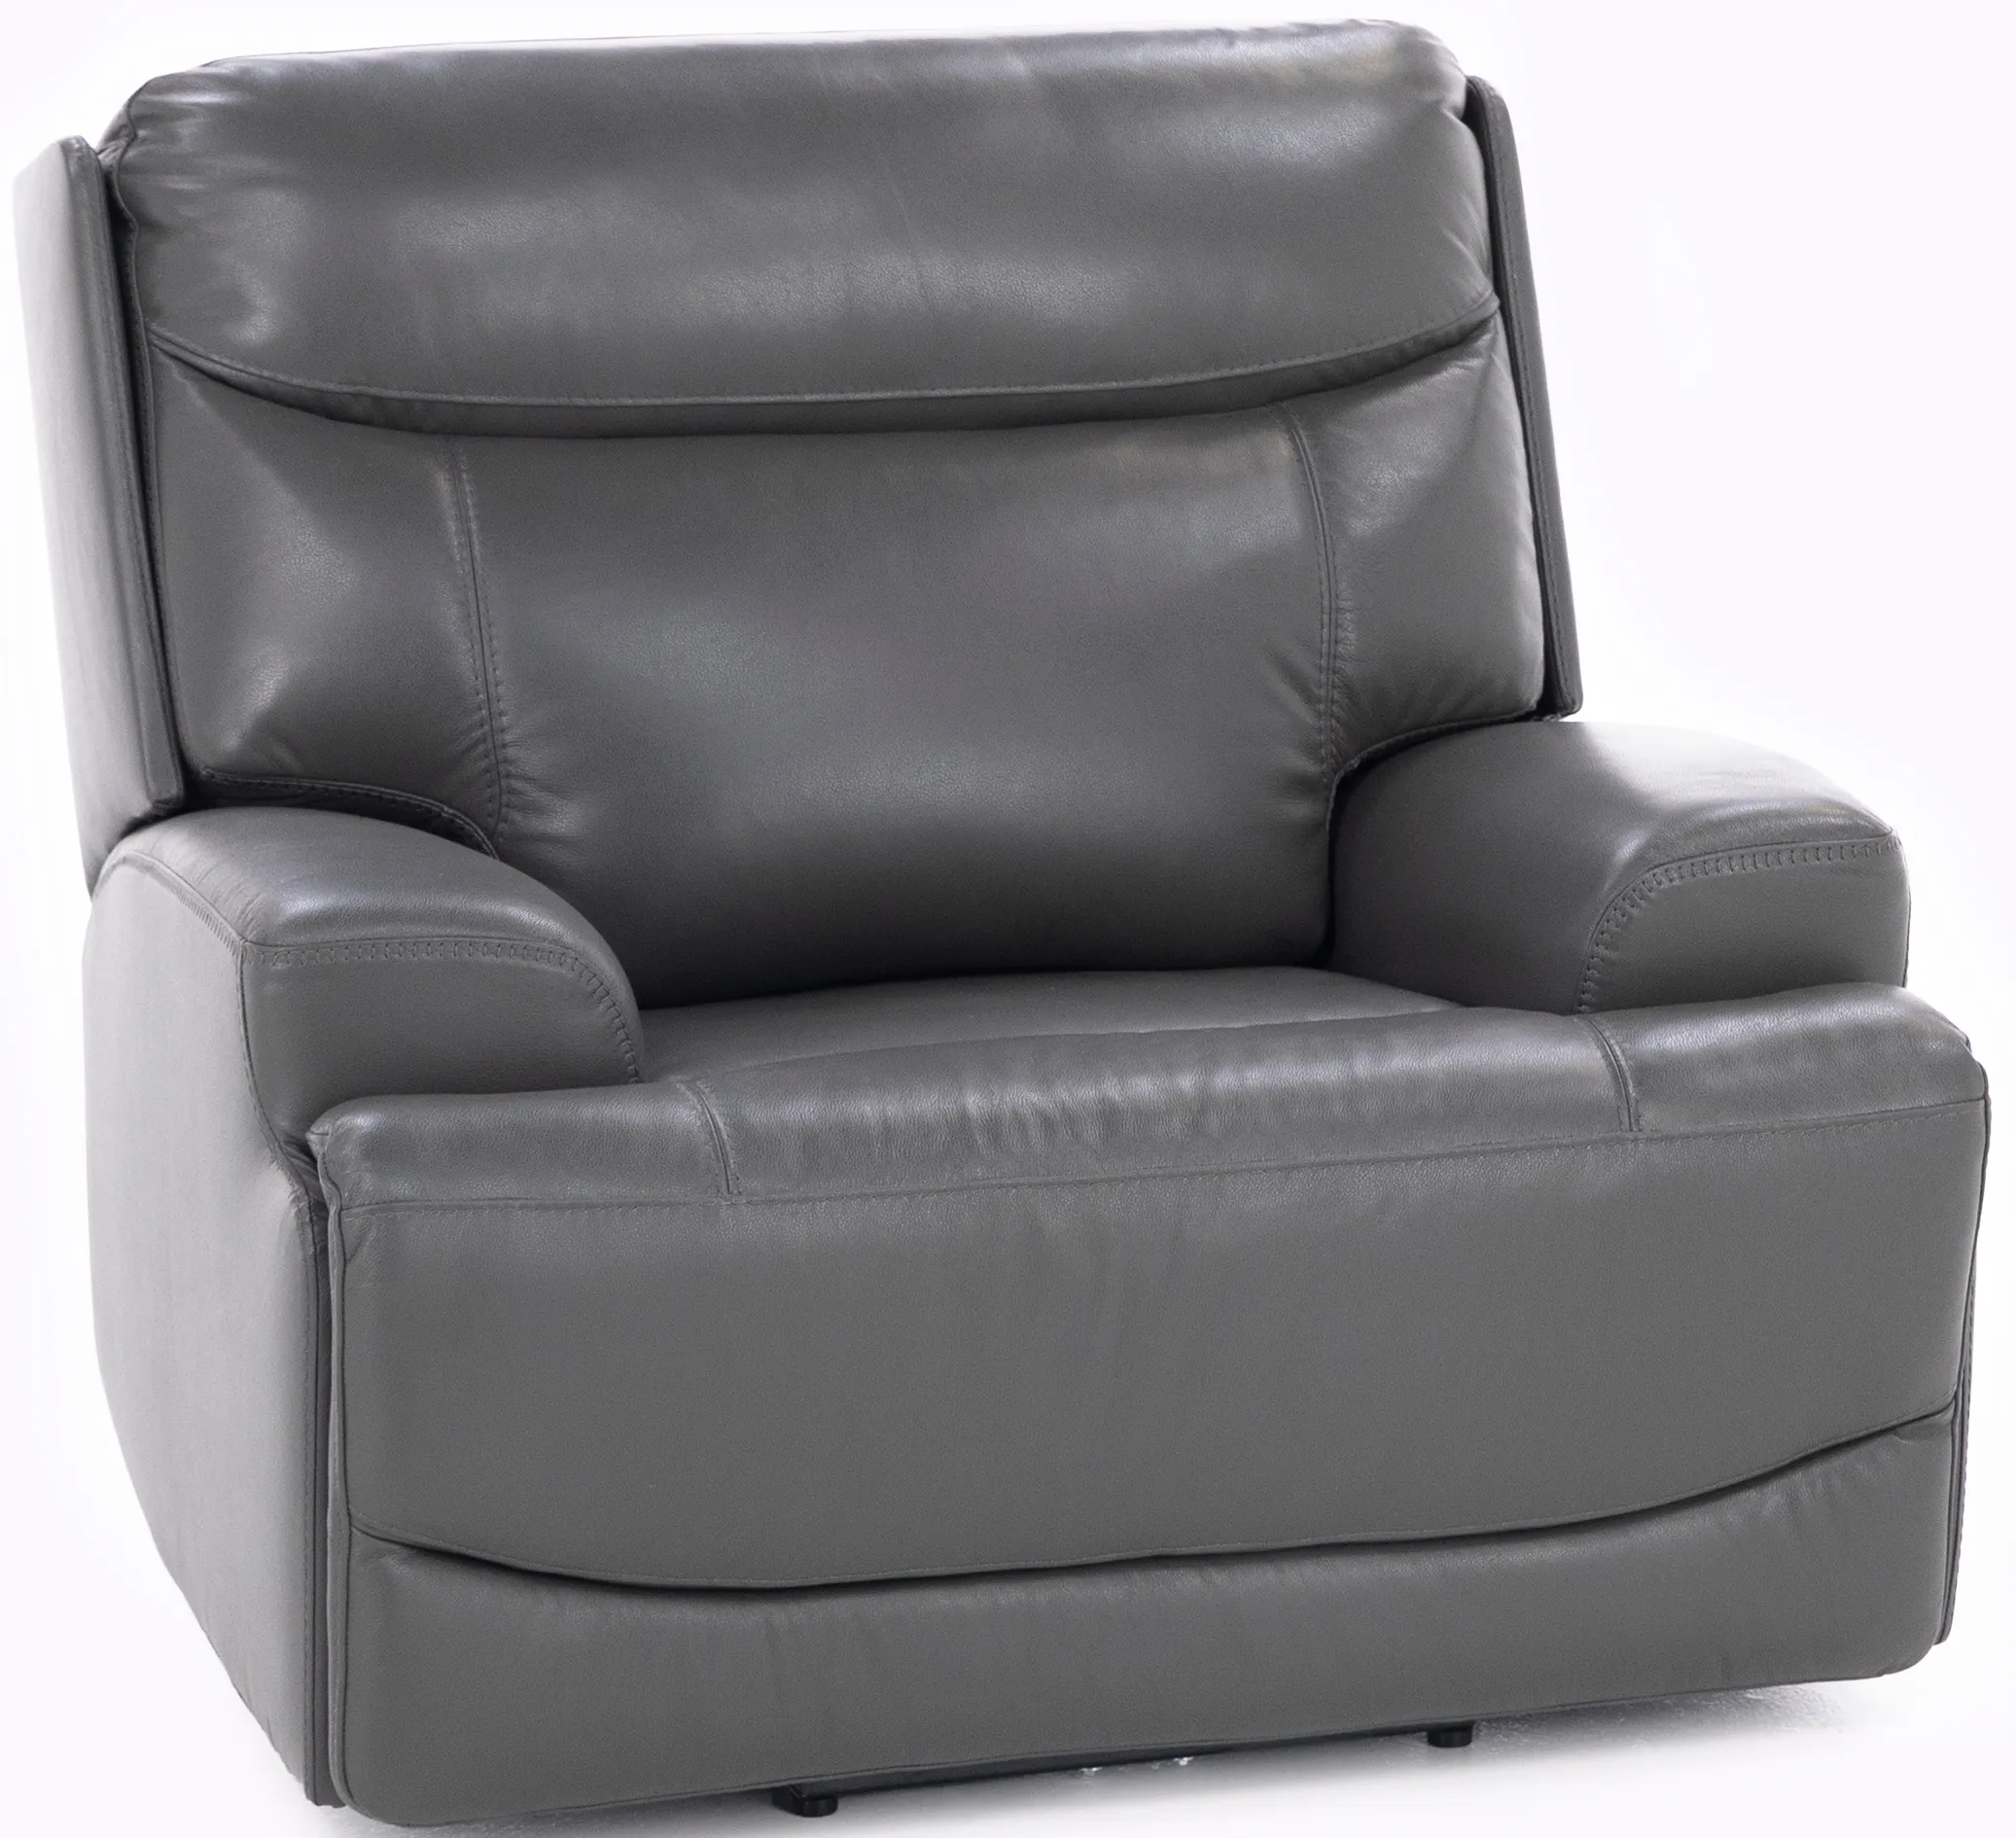 Denali Leather Fully Loaded Recliner with Air Massage and Heat